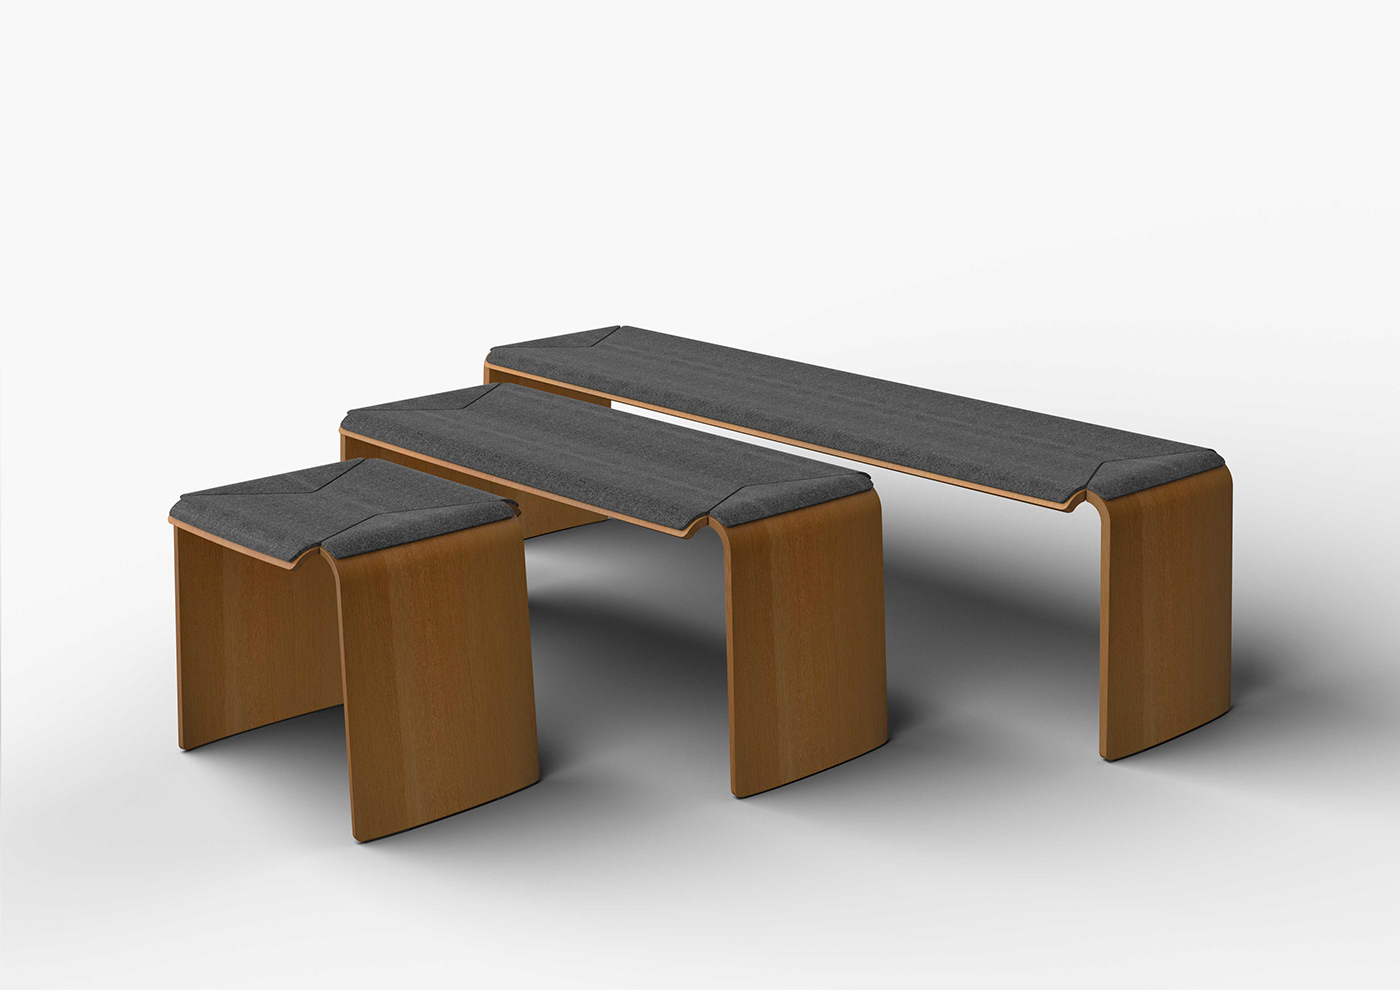 stool public space interieur bench plywood furniture wood chair sketchfab Bank